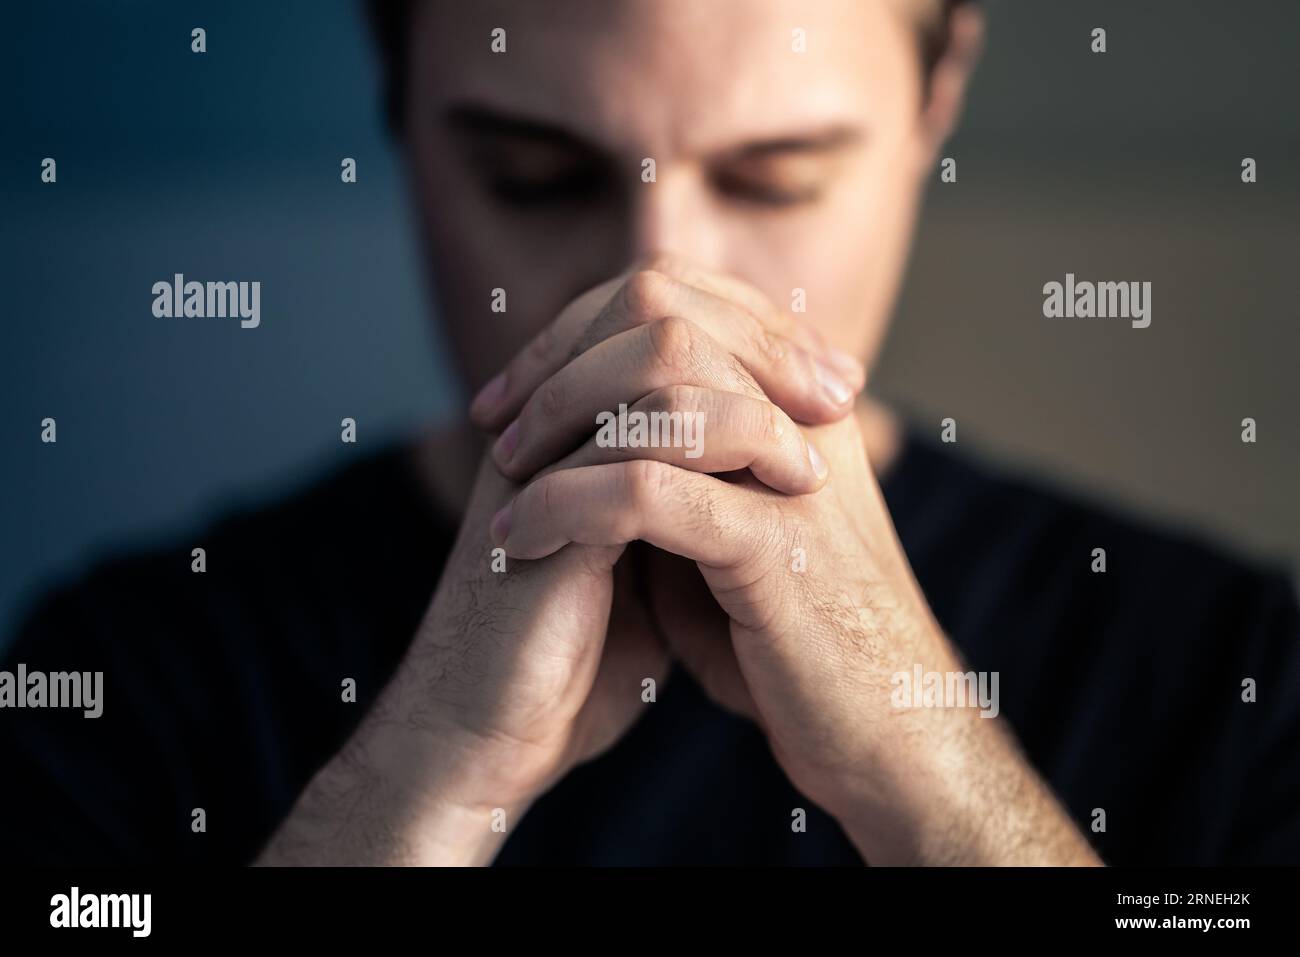 Praying hands. Prayer to God. Catholic or Christian man. Faith, religion and belief. Help and hope from Bible and church. Worship Jesus. Stock Photo